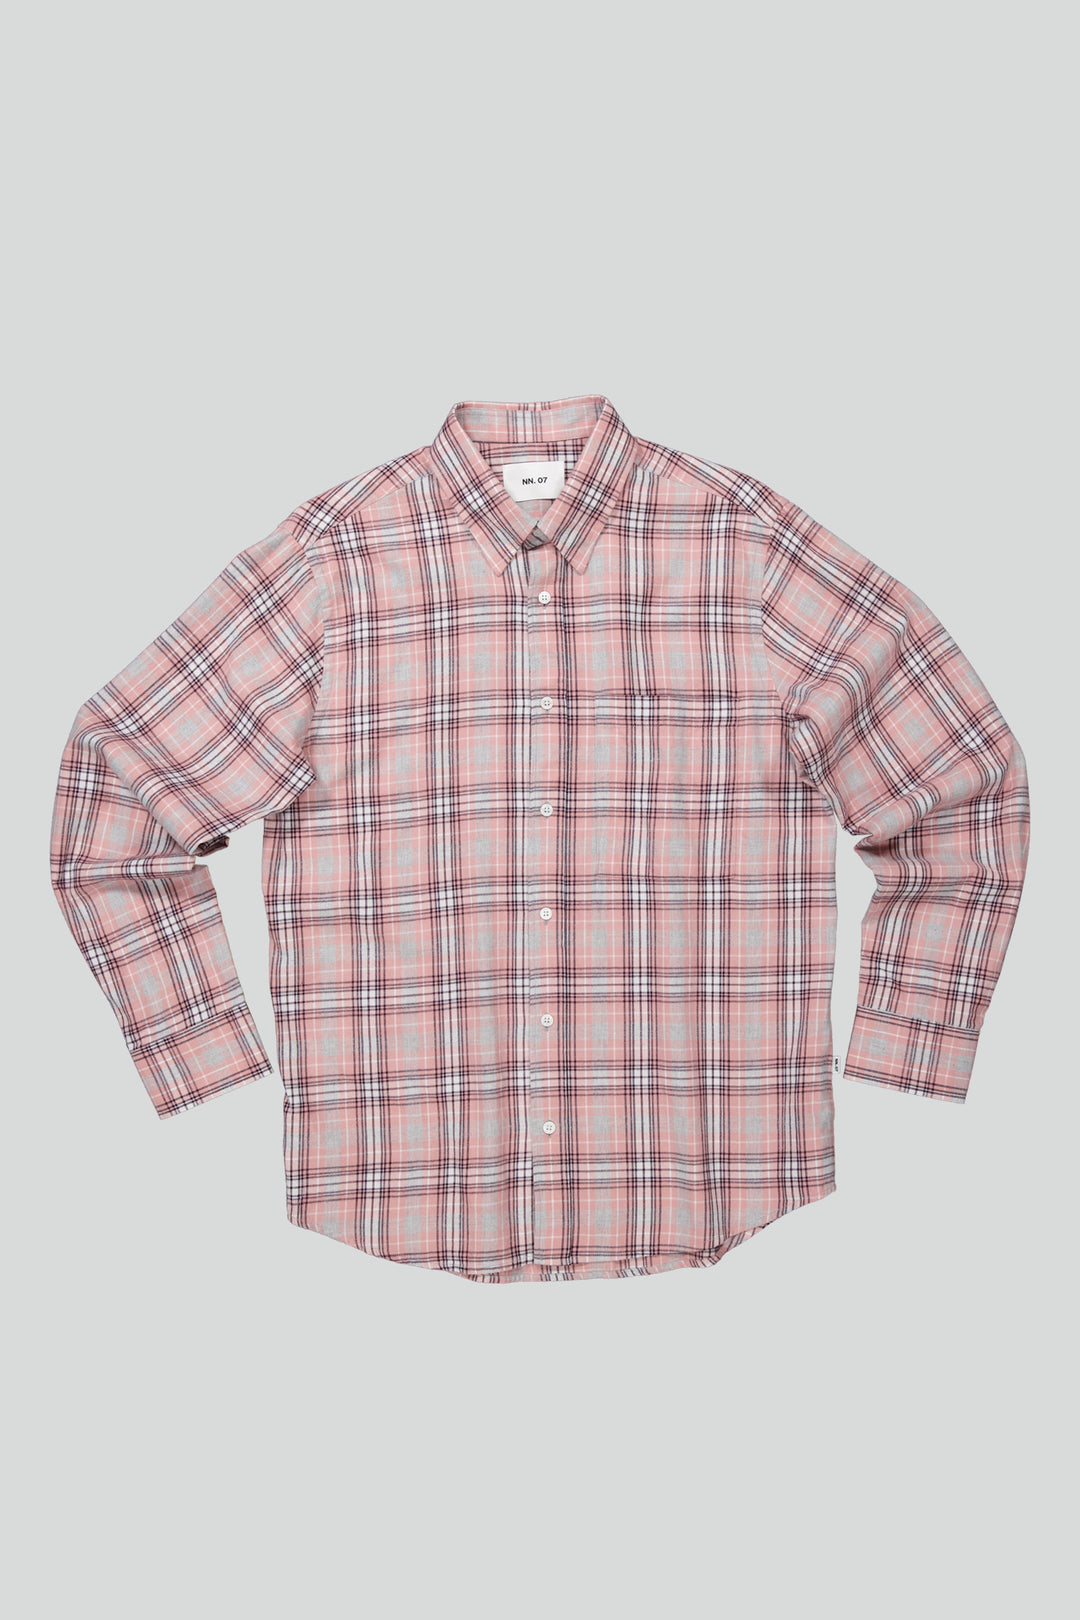 NN07 New Arne 5166 Cotton Blend Check Shirt Coral Check | Buster McGee